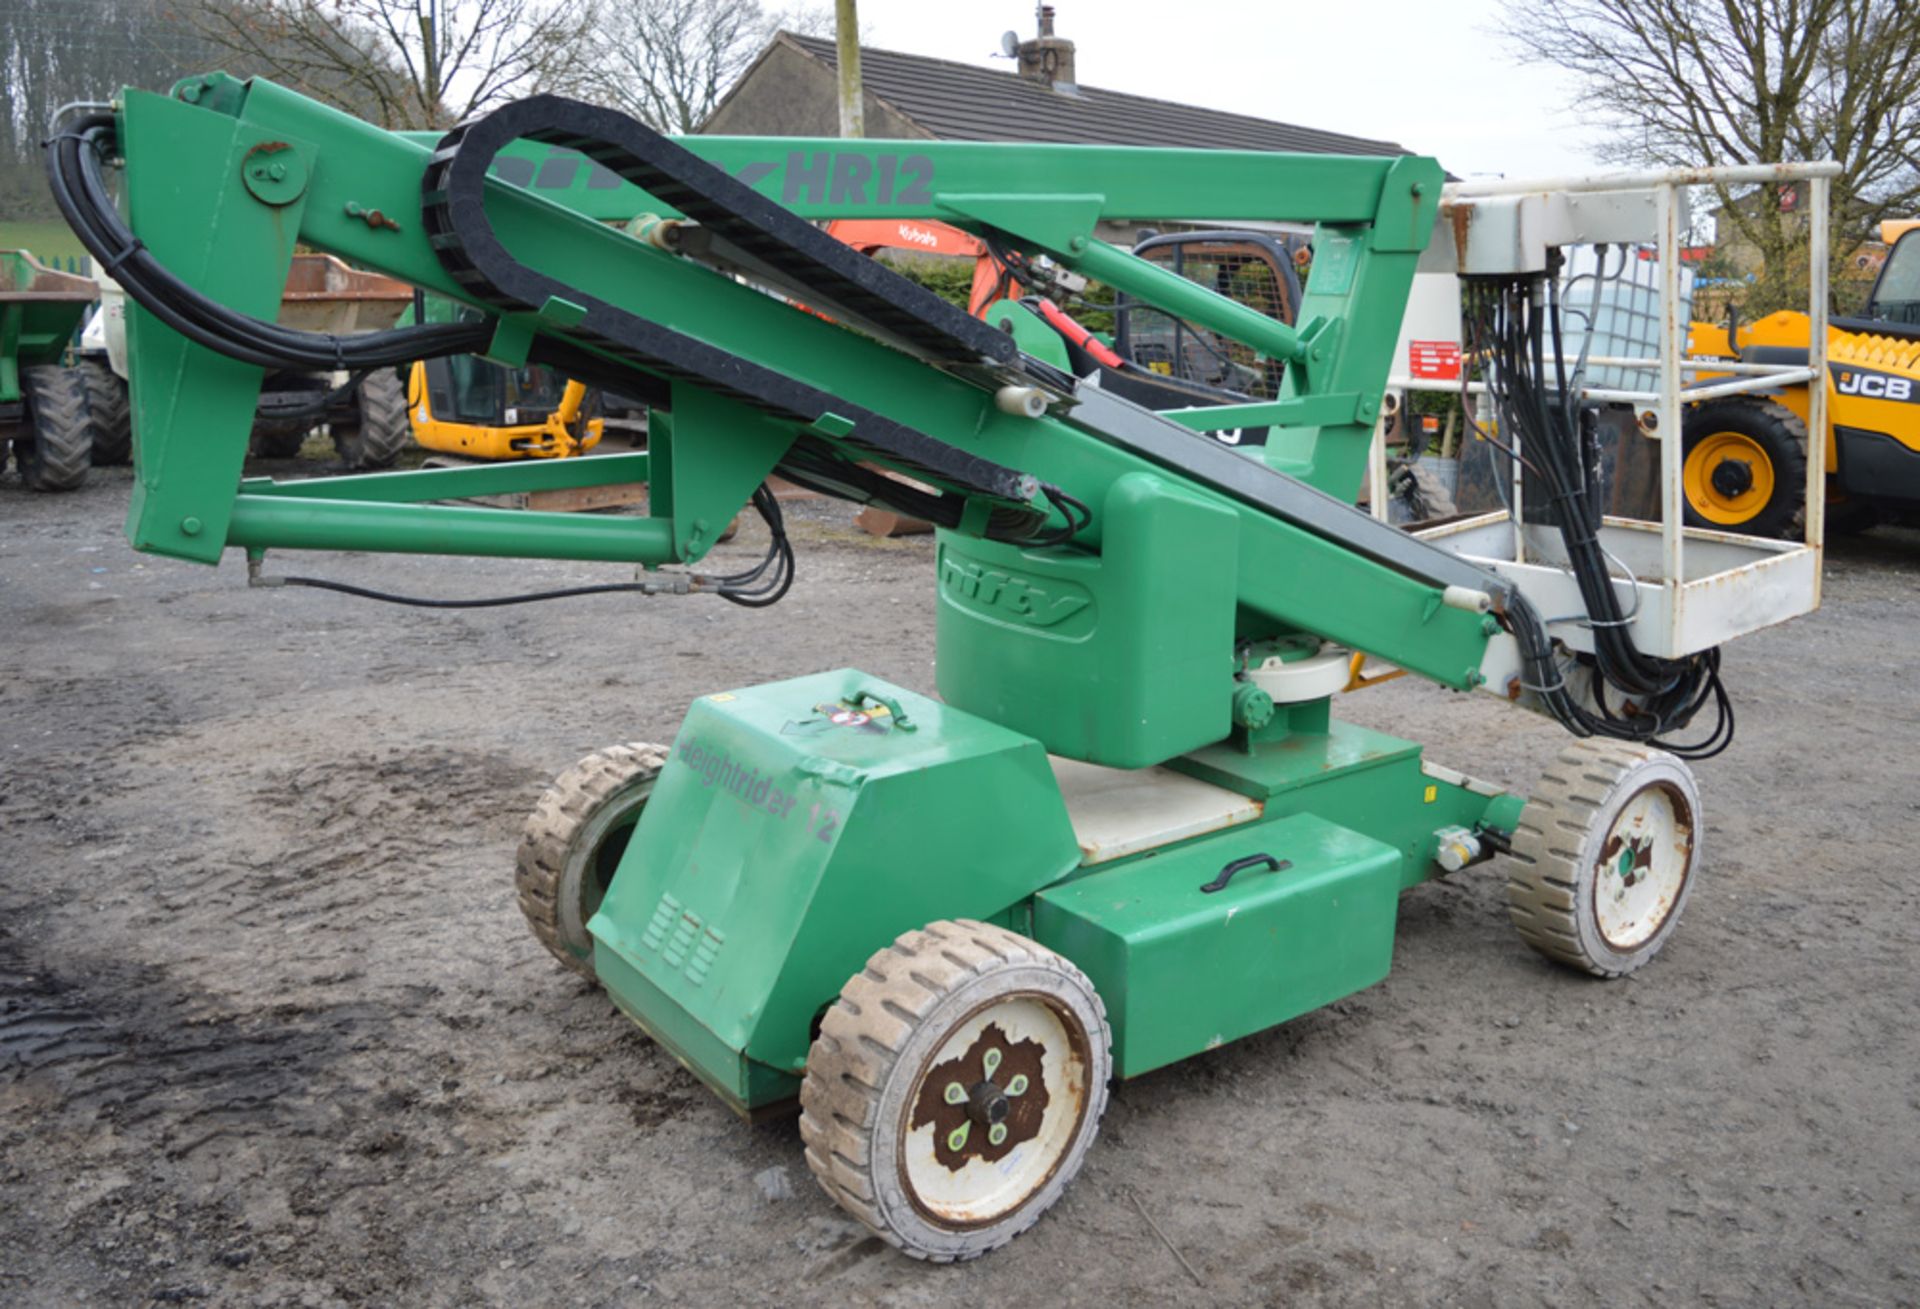 Nifty HR12 height rider 12 metre diesel/battery boom lift Year: 2008 S/N: 17701 A512398